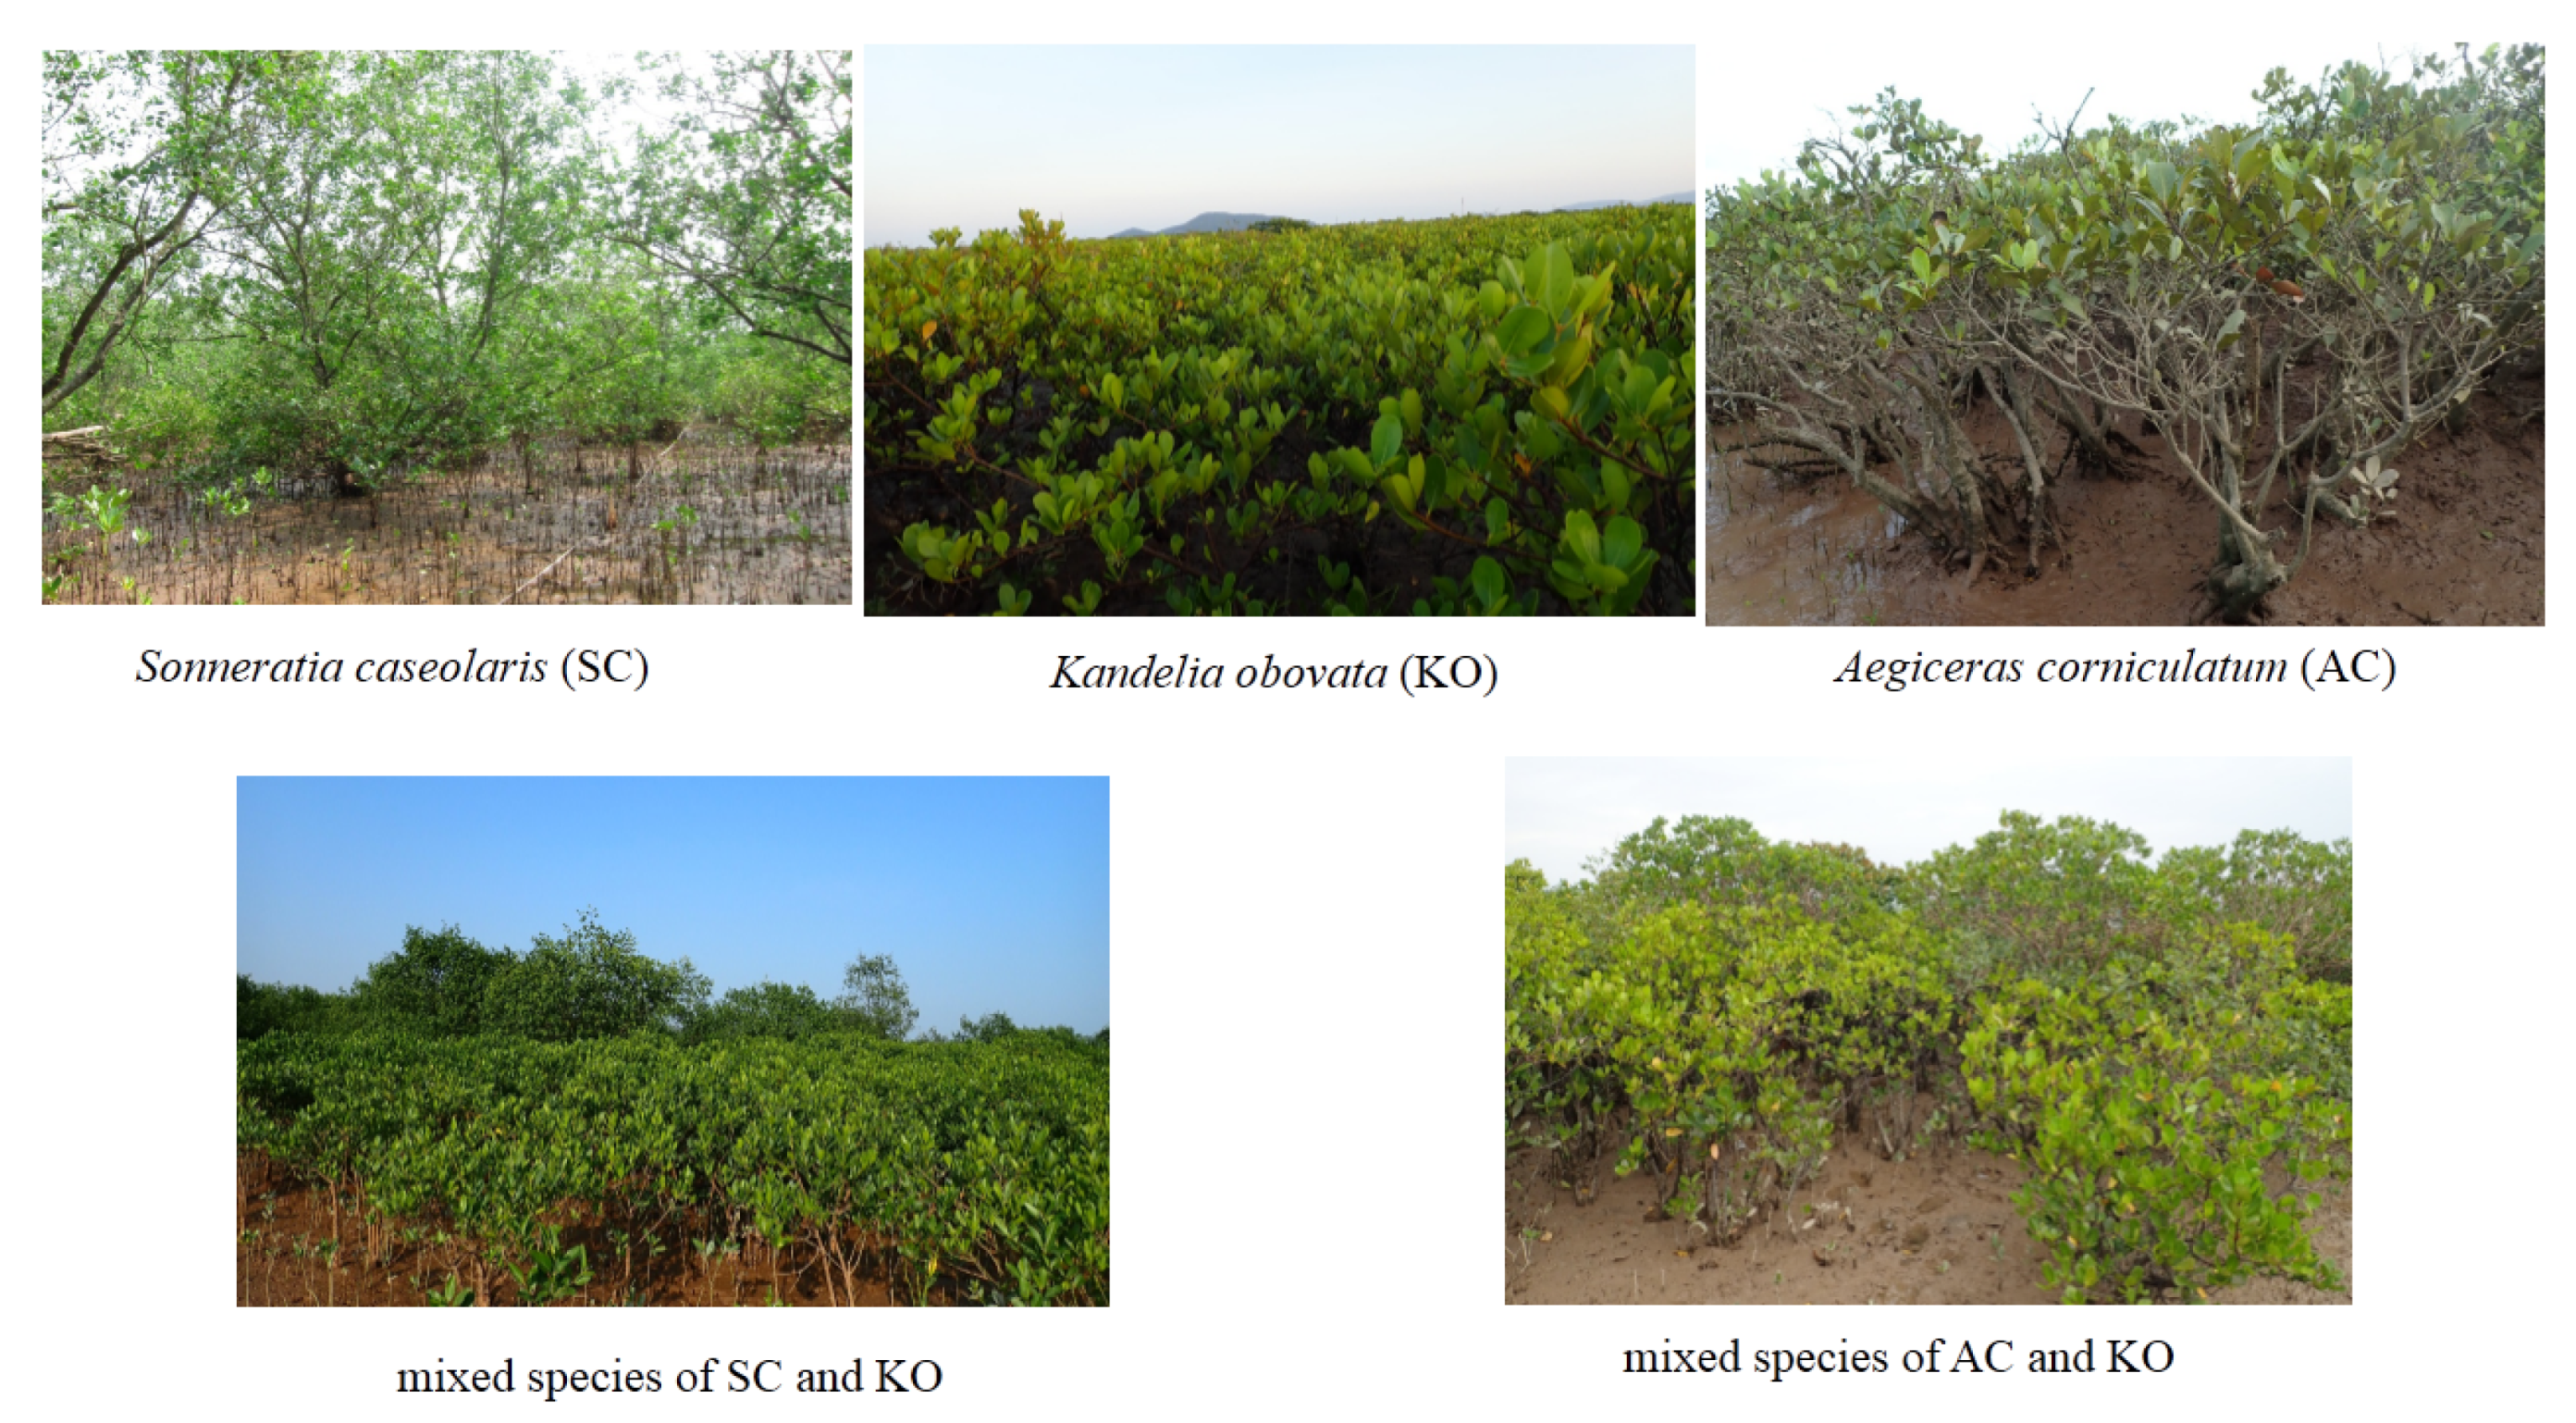 Sensors | Free Full-Text | A Review of Remote Sensing Approaches for  Monitoring Blue Carbon Ecosystems: Mangroves, Seagrassesand Salt Marshes  during 2010–2018 | HTML